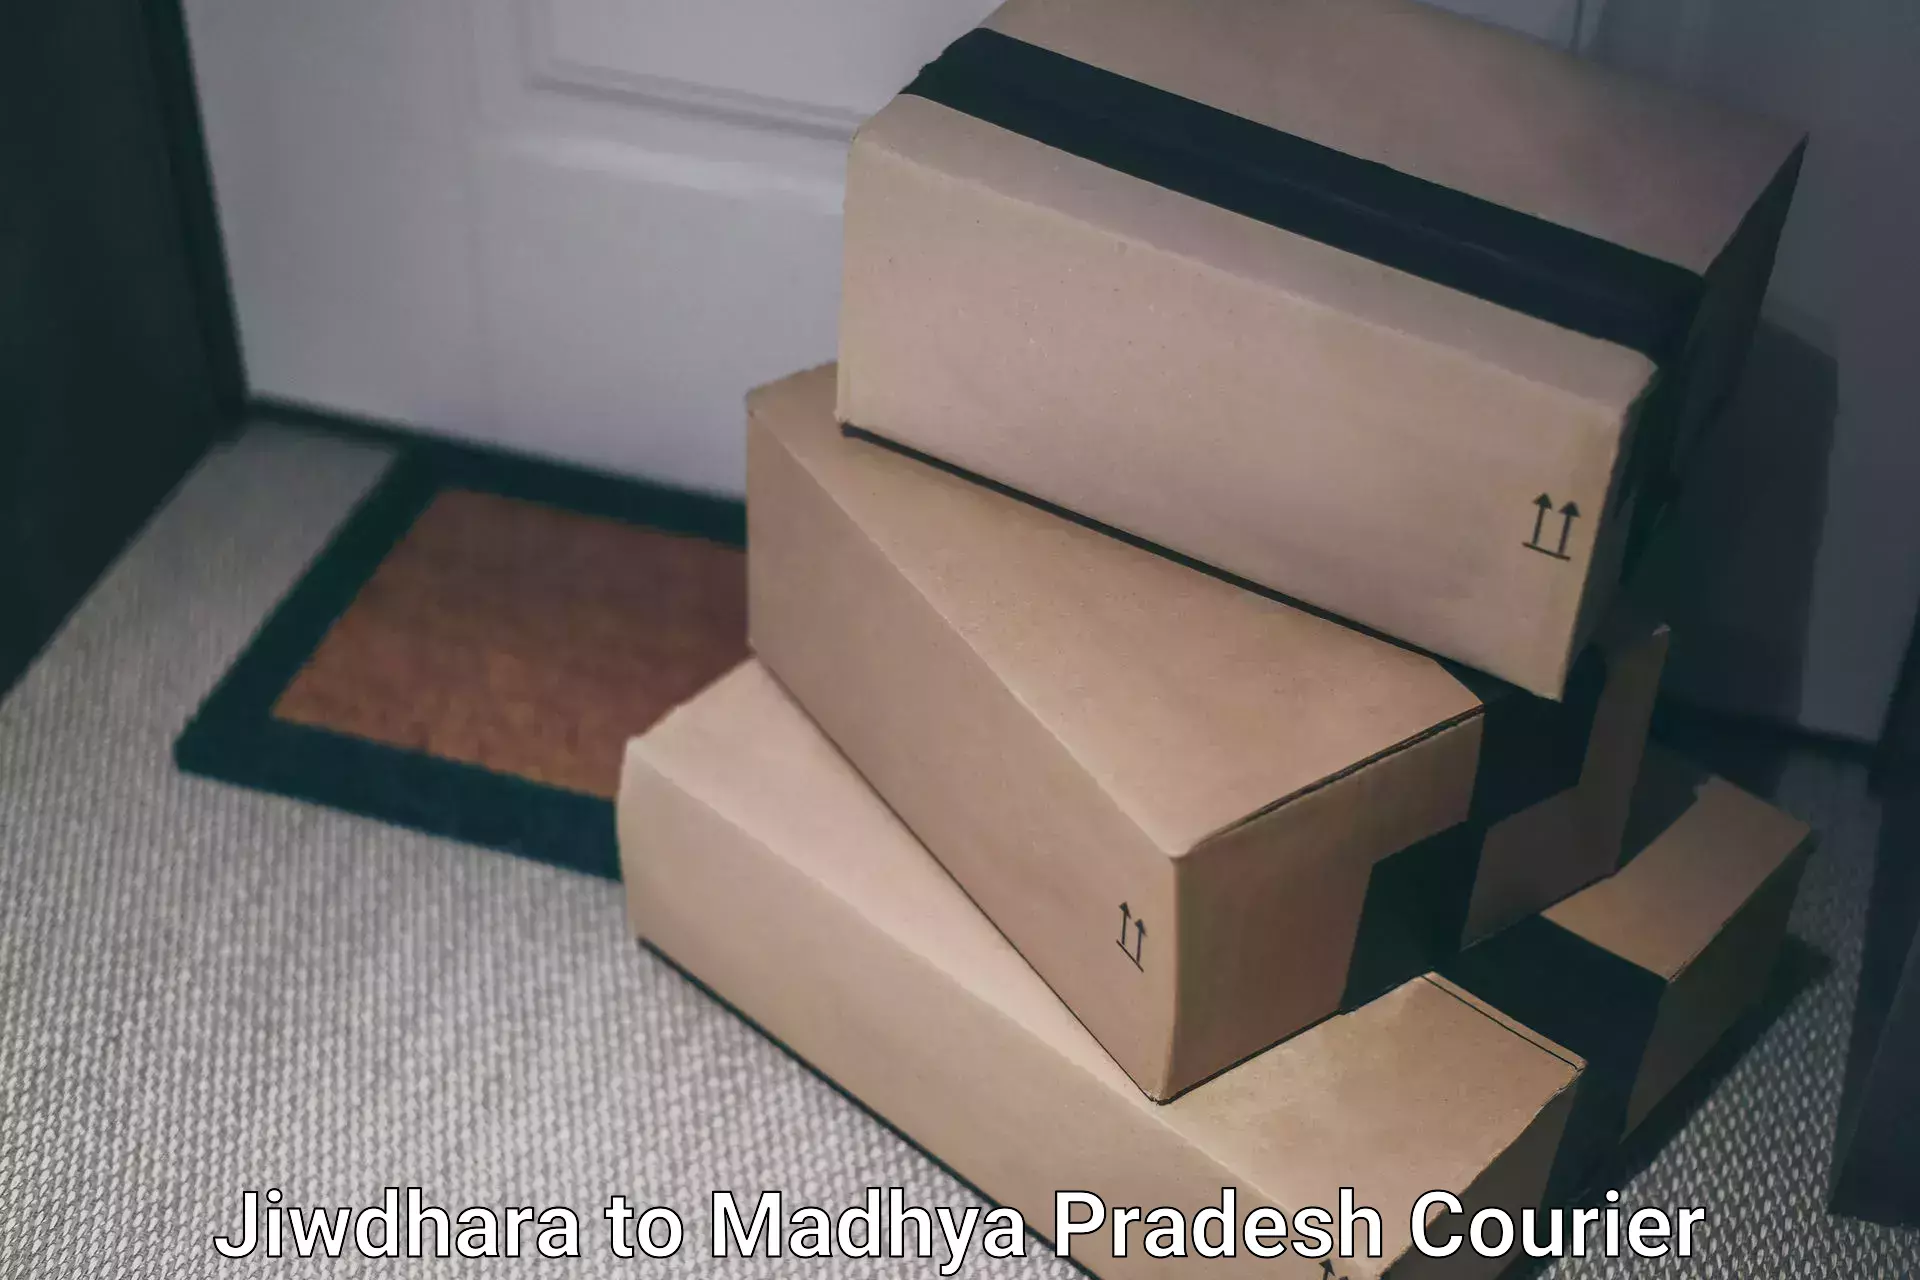 Easy access courier services in Jiwdhara to Mandla